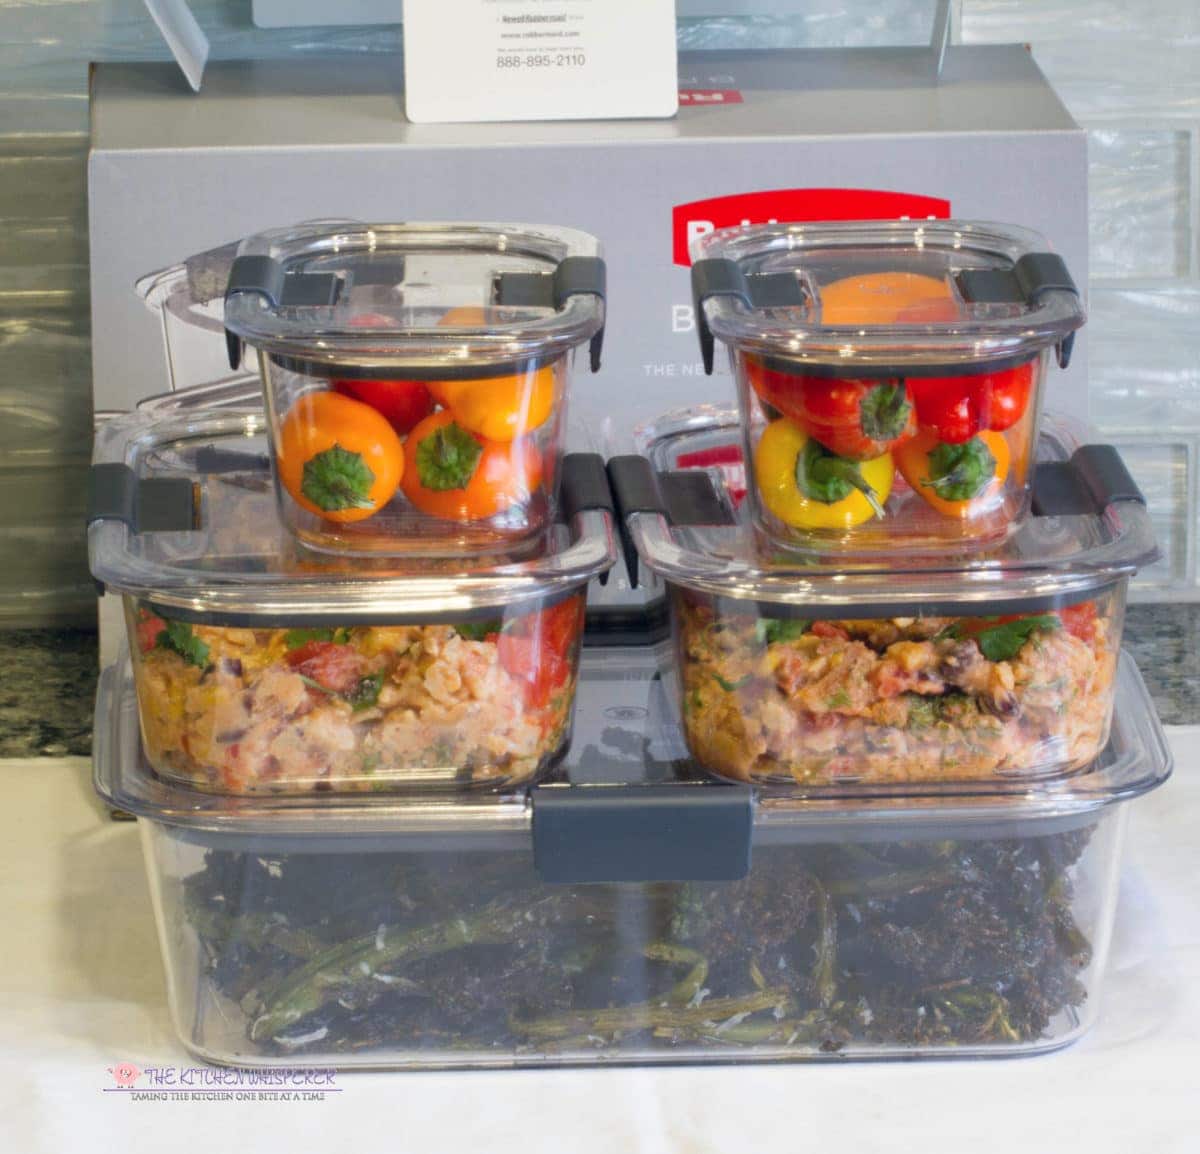 Rubbermaid Brilliance Meal Prep.mp4, bowl, meal preparation, holiday